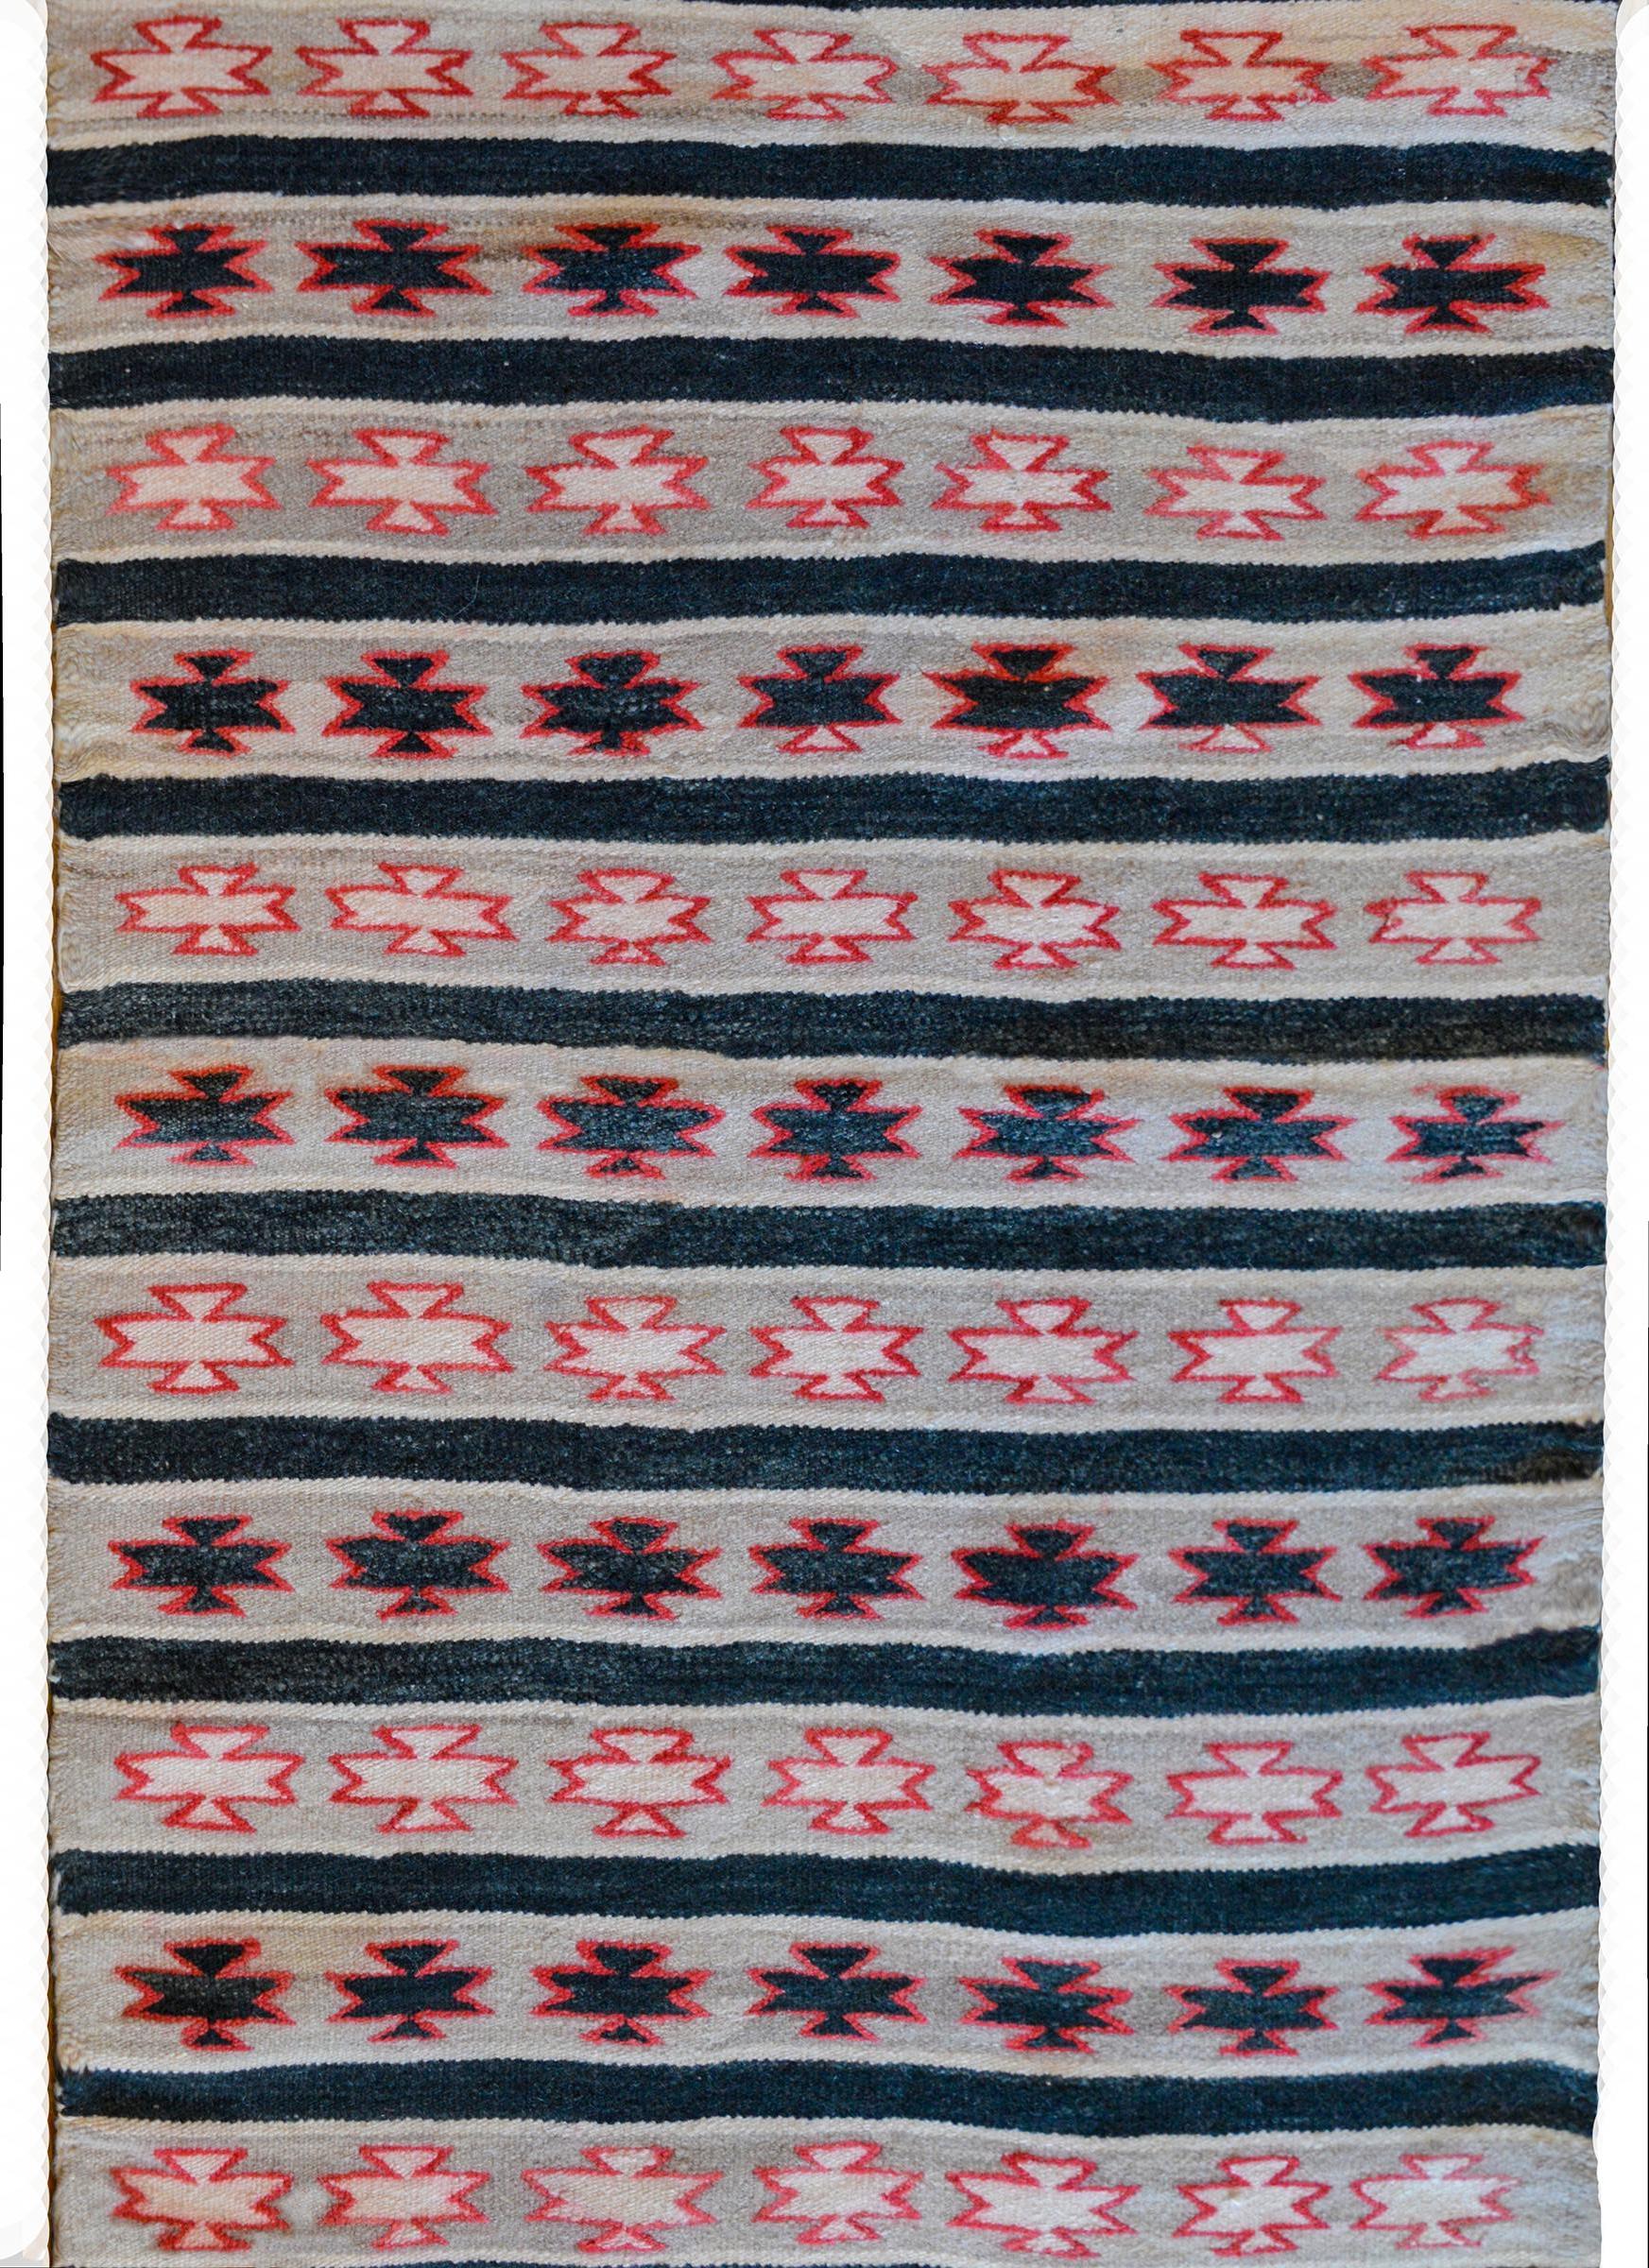 A wonderful mid-20th century Navajo rug with a bands of stars or stylized flowers alternating in crimson and black across the field.